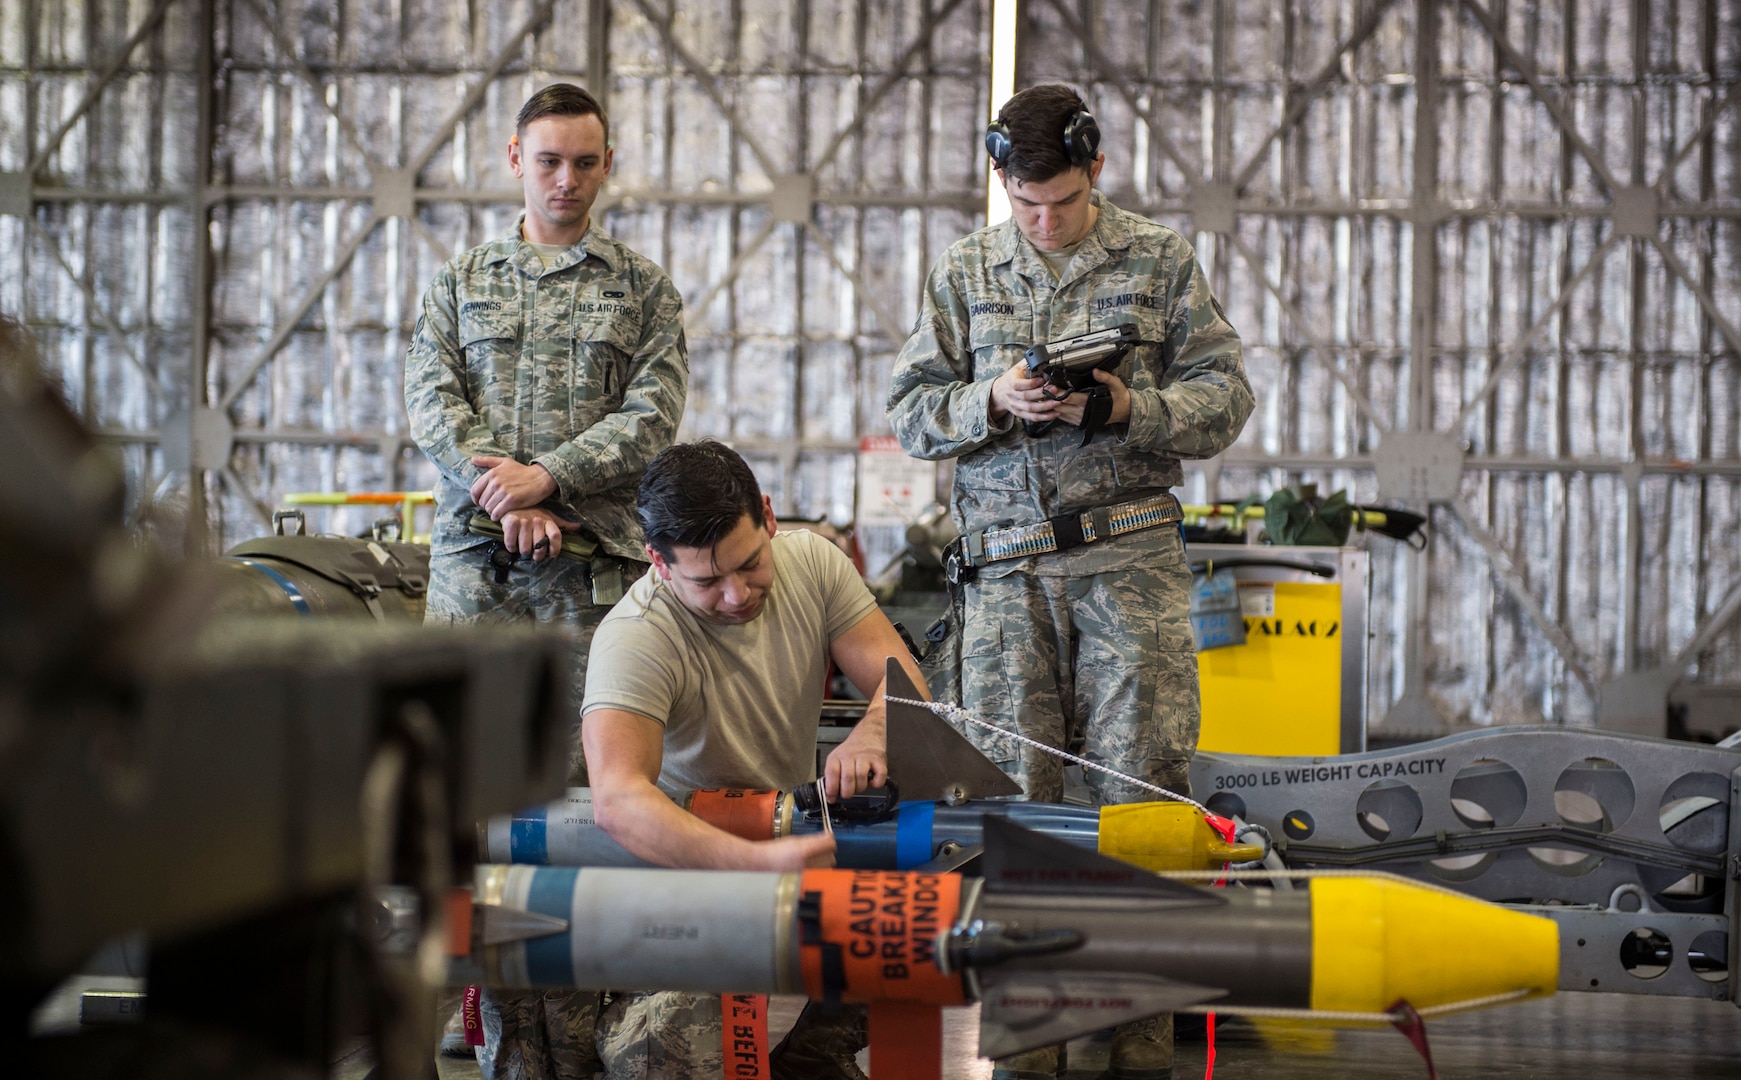 U.S. Air Force Senior Airman Jacob D. Jennings, left, a 35th Maintenance Group weapons evaluator, watches Senior Airman Paul Uribe, center, a 13th Aircraft Maintenance Squadron load crew member prepare an AIM-9 sidewinder as Staff Sgt. Daniel Garrison, right, a 13th Aircraft Maintenance Squadron weapons load crew team chief, reviews checklist at Misawa Air Base, Japan, Feb. 28, 2017. Misawa displays its commitment to the Indo-Asia-Pacific by ensuring its Airmen stay ready each day to perform their critical duties, in this case loading weapons onto F-16 Fighting Falcons.